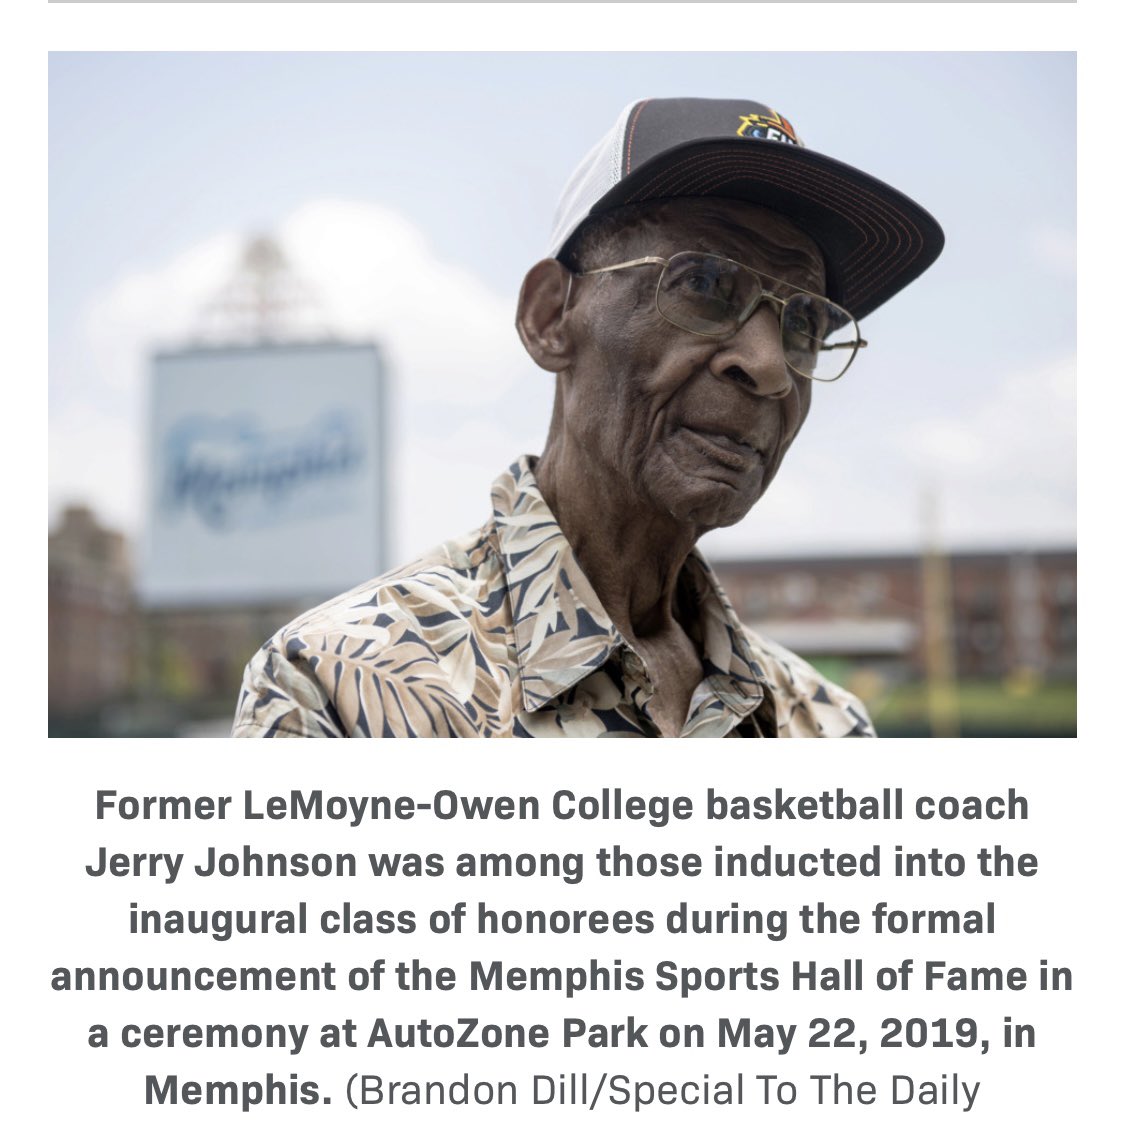 We loss a Memphis/ LeMoyne-Owen College Institution... RIP Coach Jerry Johnson 🙏🏾🙏🏾🥲... every time I met and talked to Coach Johnson it was a lesson on Life. My condolences to his family and that includes ALL HIS PLAYERS. 
#jerryjohnson #lemoyneowencollege